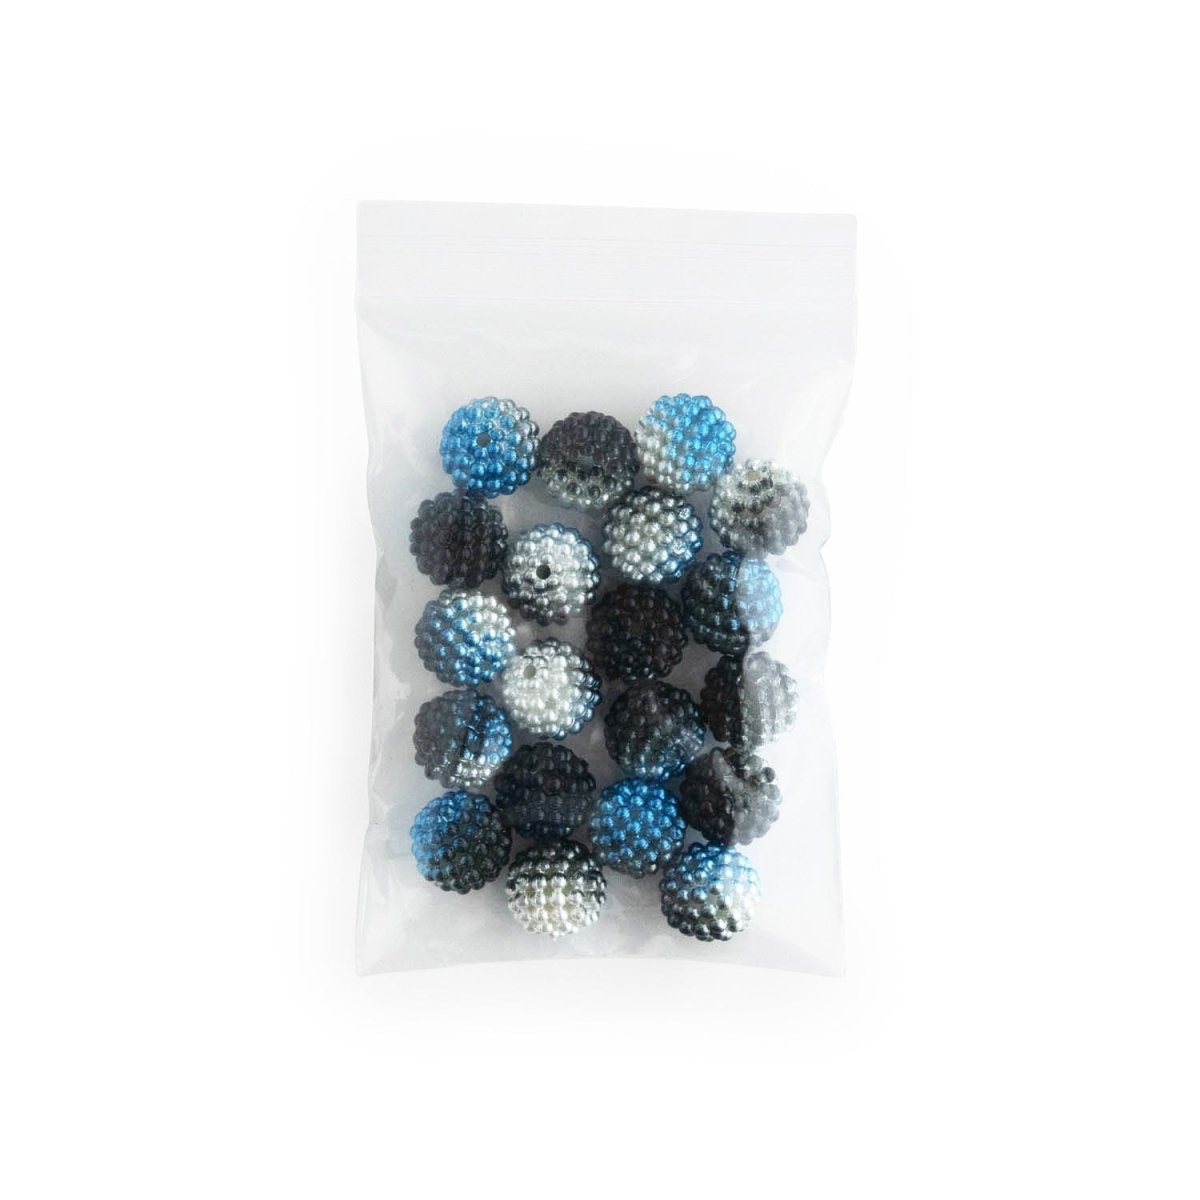 Acrylic Round Beads Ombre Pearl Berry Rhinestones 10mm Blue from Cara & Co Craft Supply